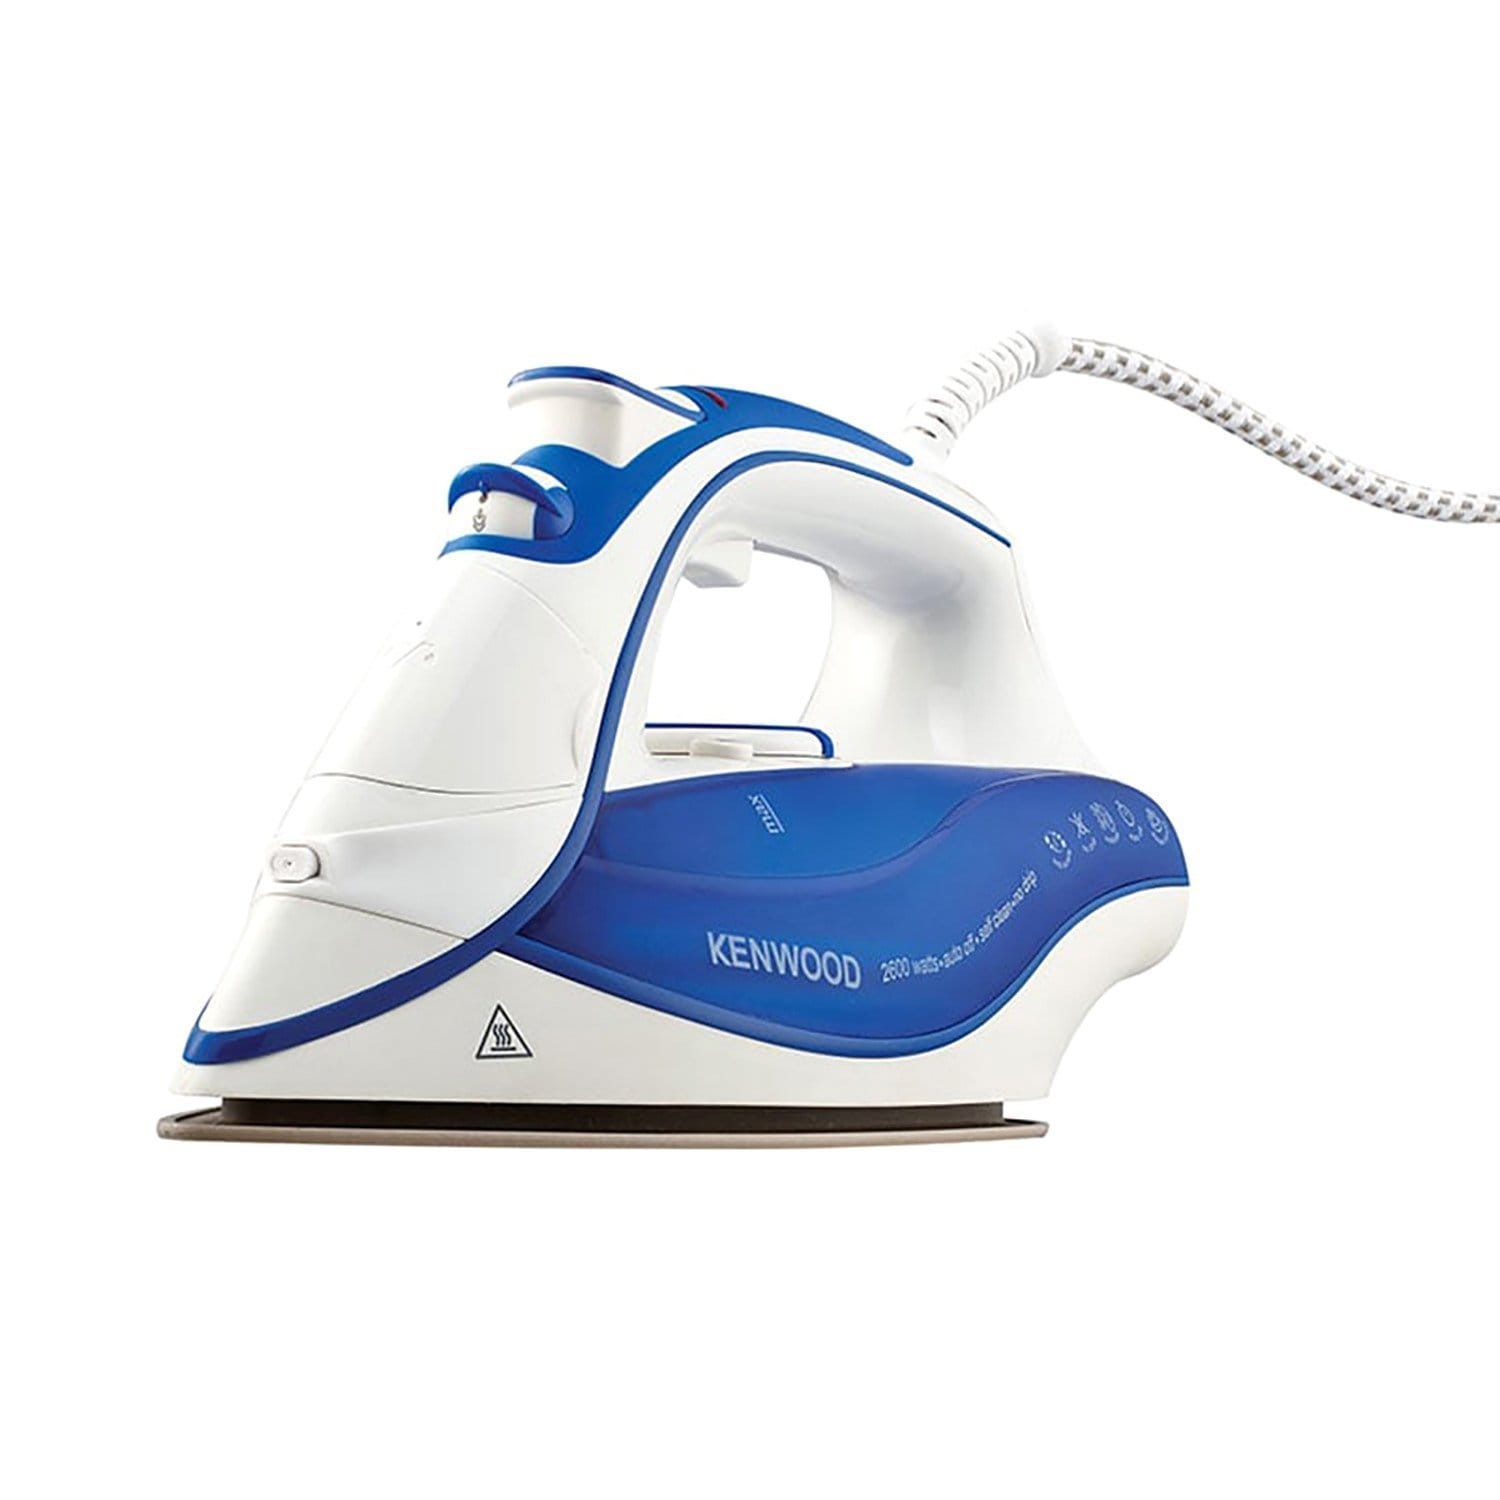 Kenwood Steam Iron - Blue and White - ISP600BL - Jashanmal Home